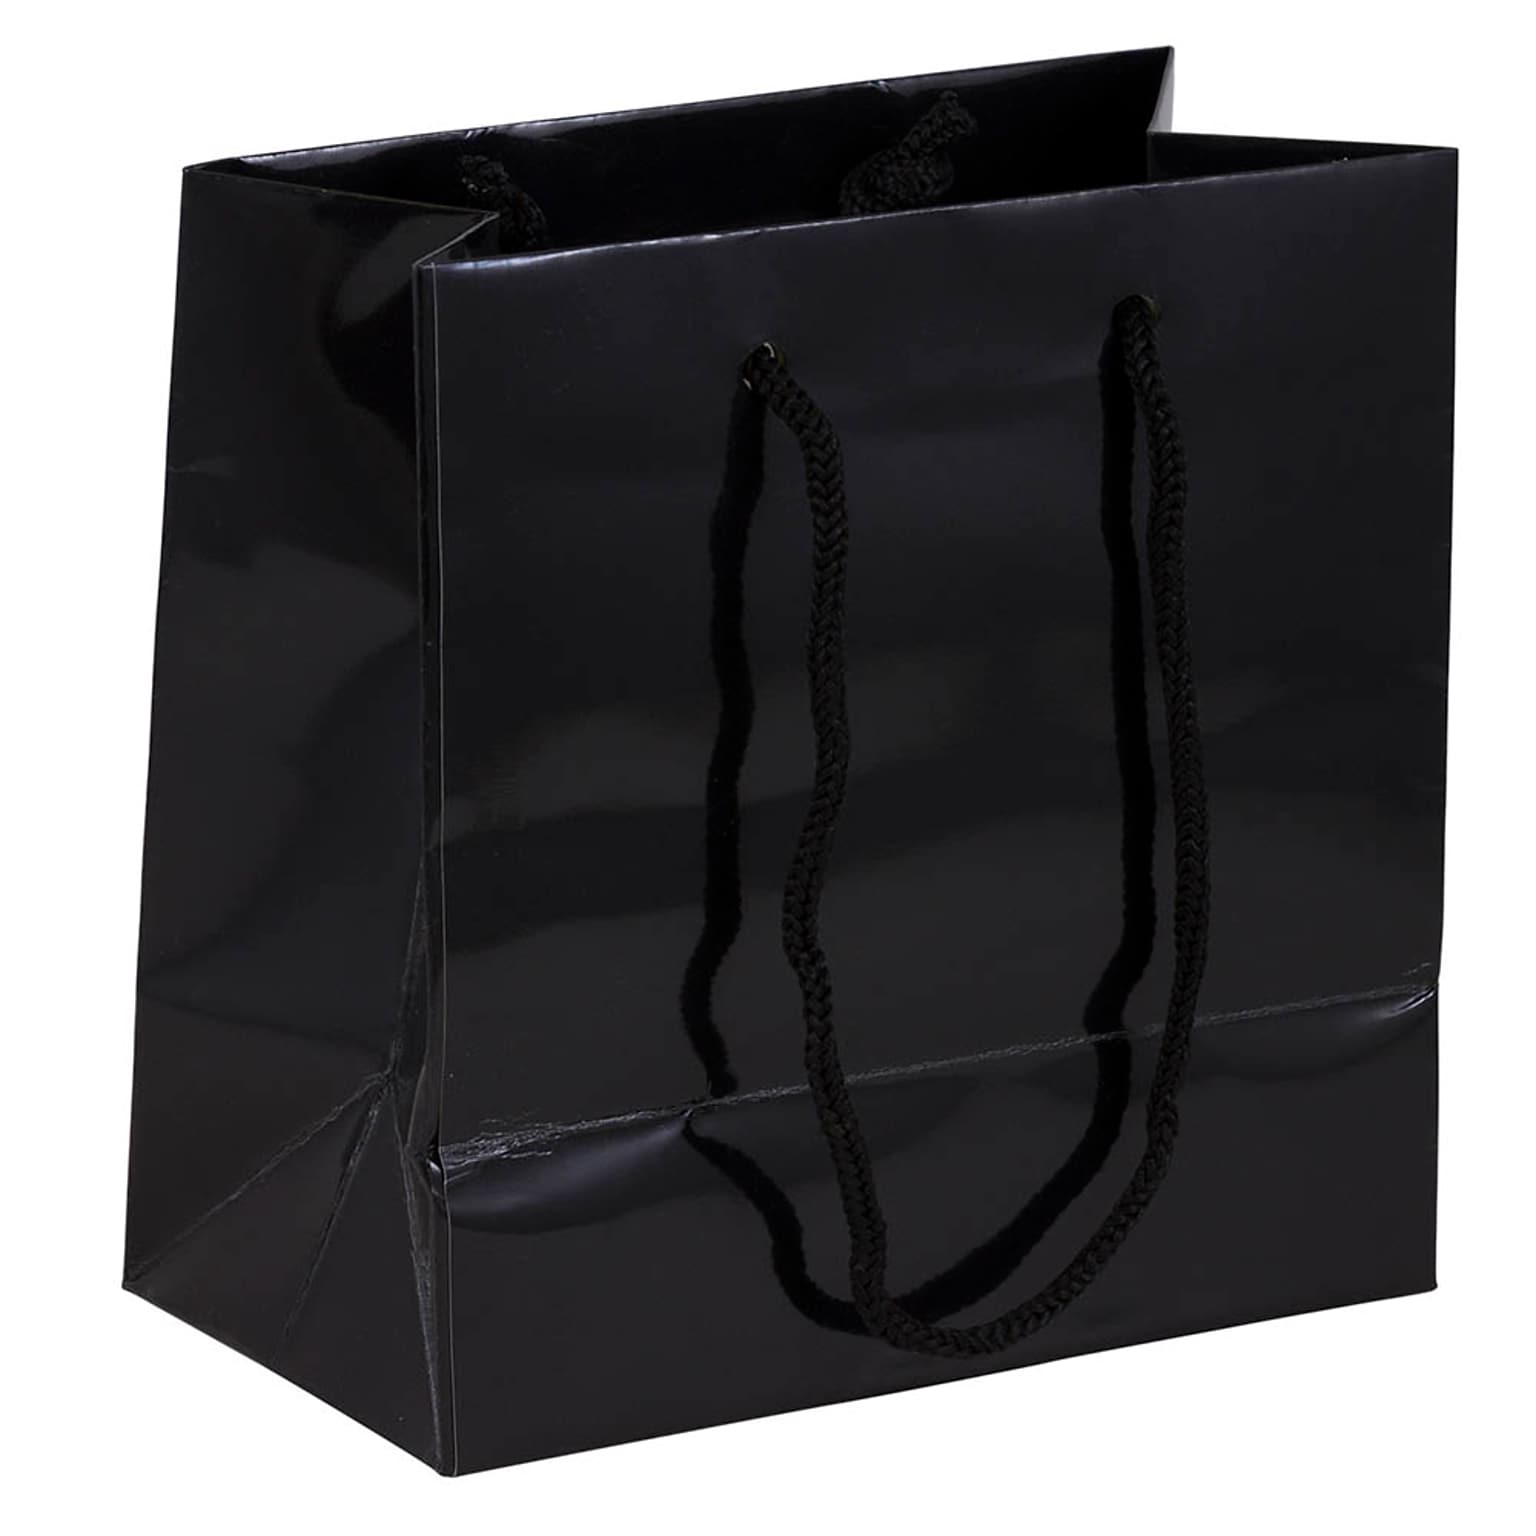 JAM PAPER Gift Bags with Rope Handles, Small Square, 6 1/2 x 6 1/2 x 3 1/2, Black Glossy, Bulk 100 Bags/Pack (896GLBL100)